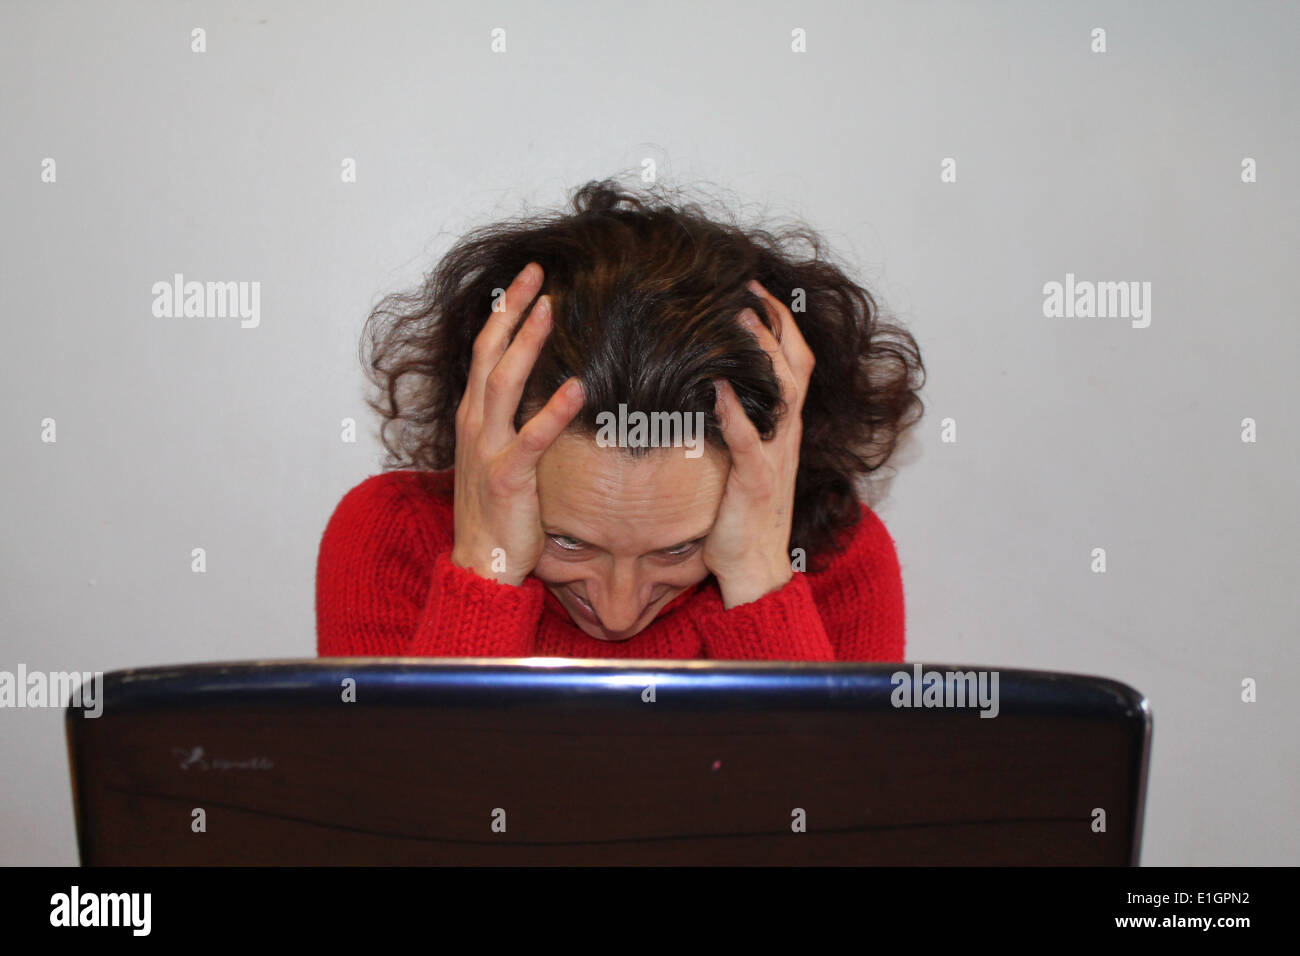 A Lady looking Stressed in front of a laptop computer Stock Photo